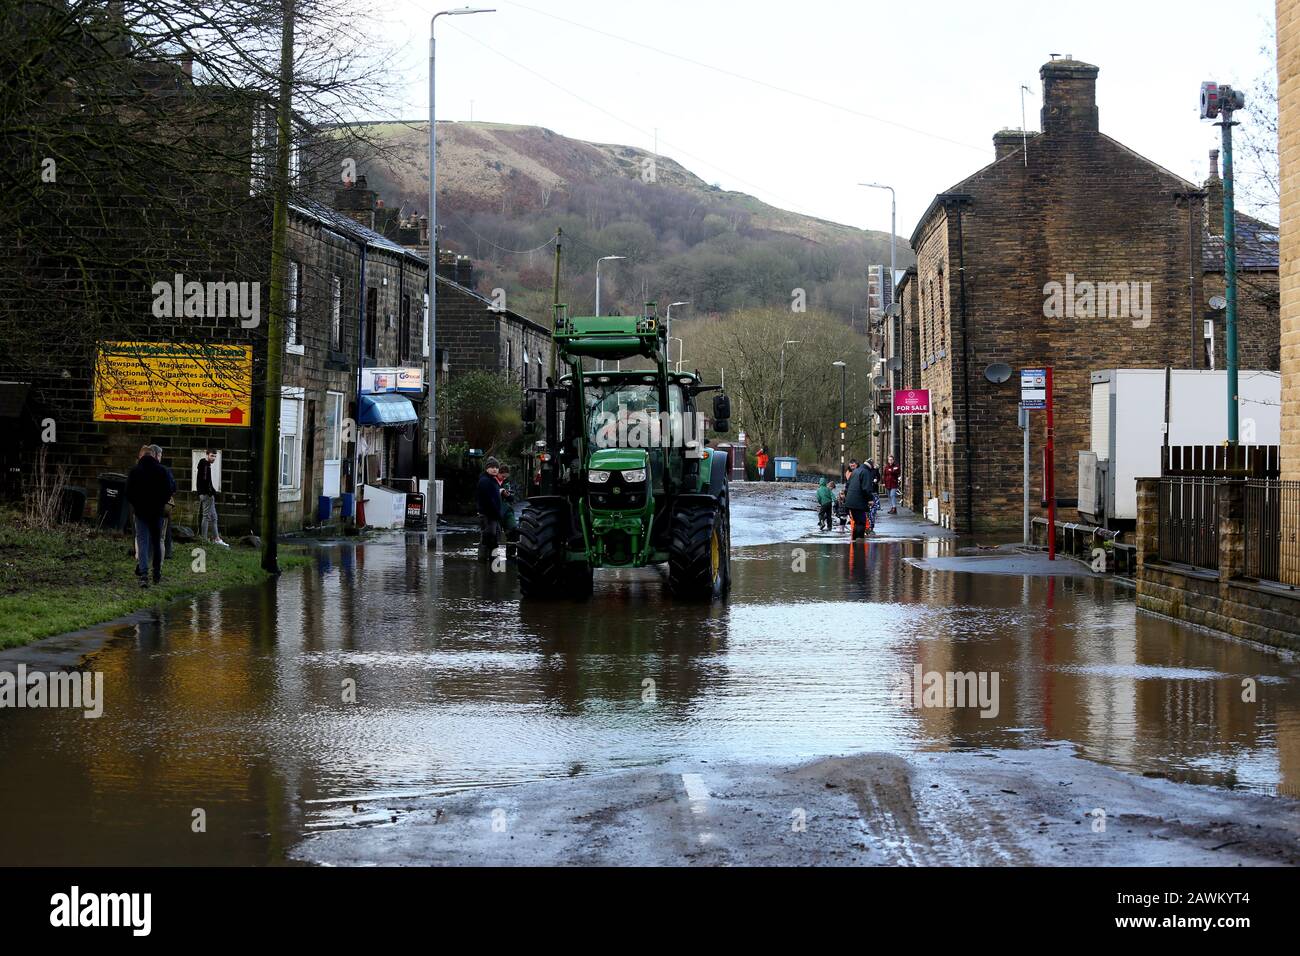 Marsden, UK. 9th February, 2020. Storm Ciara leaves a trail of damage in the Calder valley.  Rain has washed stones and  a railway sleeper onto the Rochdale to Todmorden Road.  A tree has fallen across the railway line.  A tractor is been used to take away flood water and empty it into the Rochdale canal.  Walsden, Calder Valley, West Yorkshire, UK. Credit: Barbara Cook/Alamy Live News Stock Photo